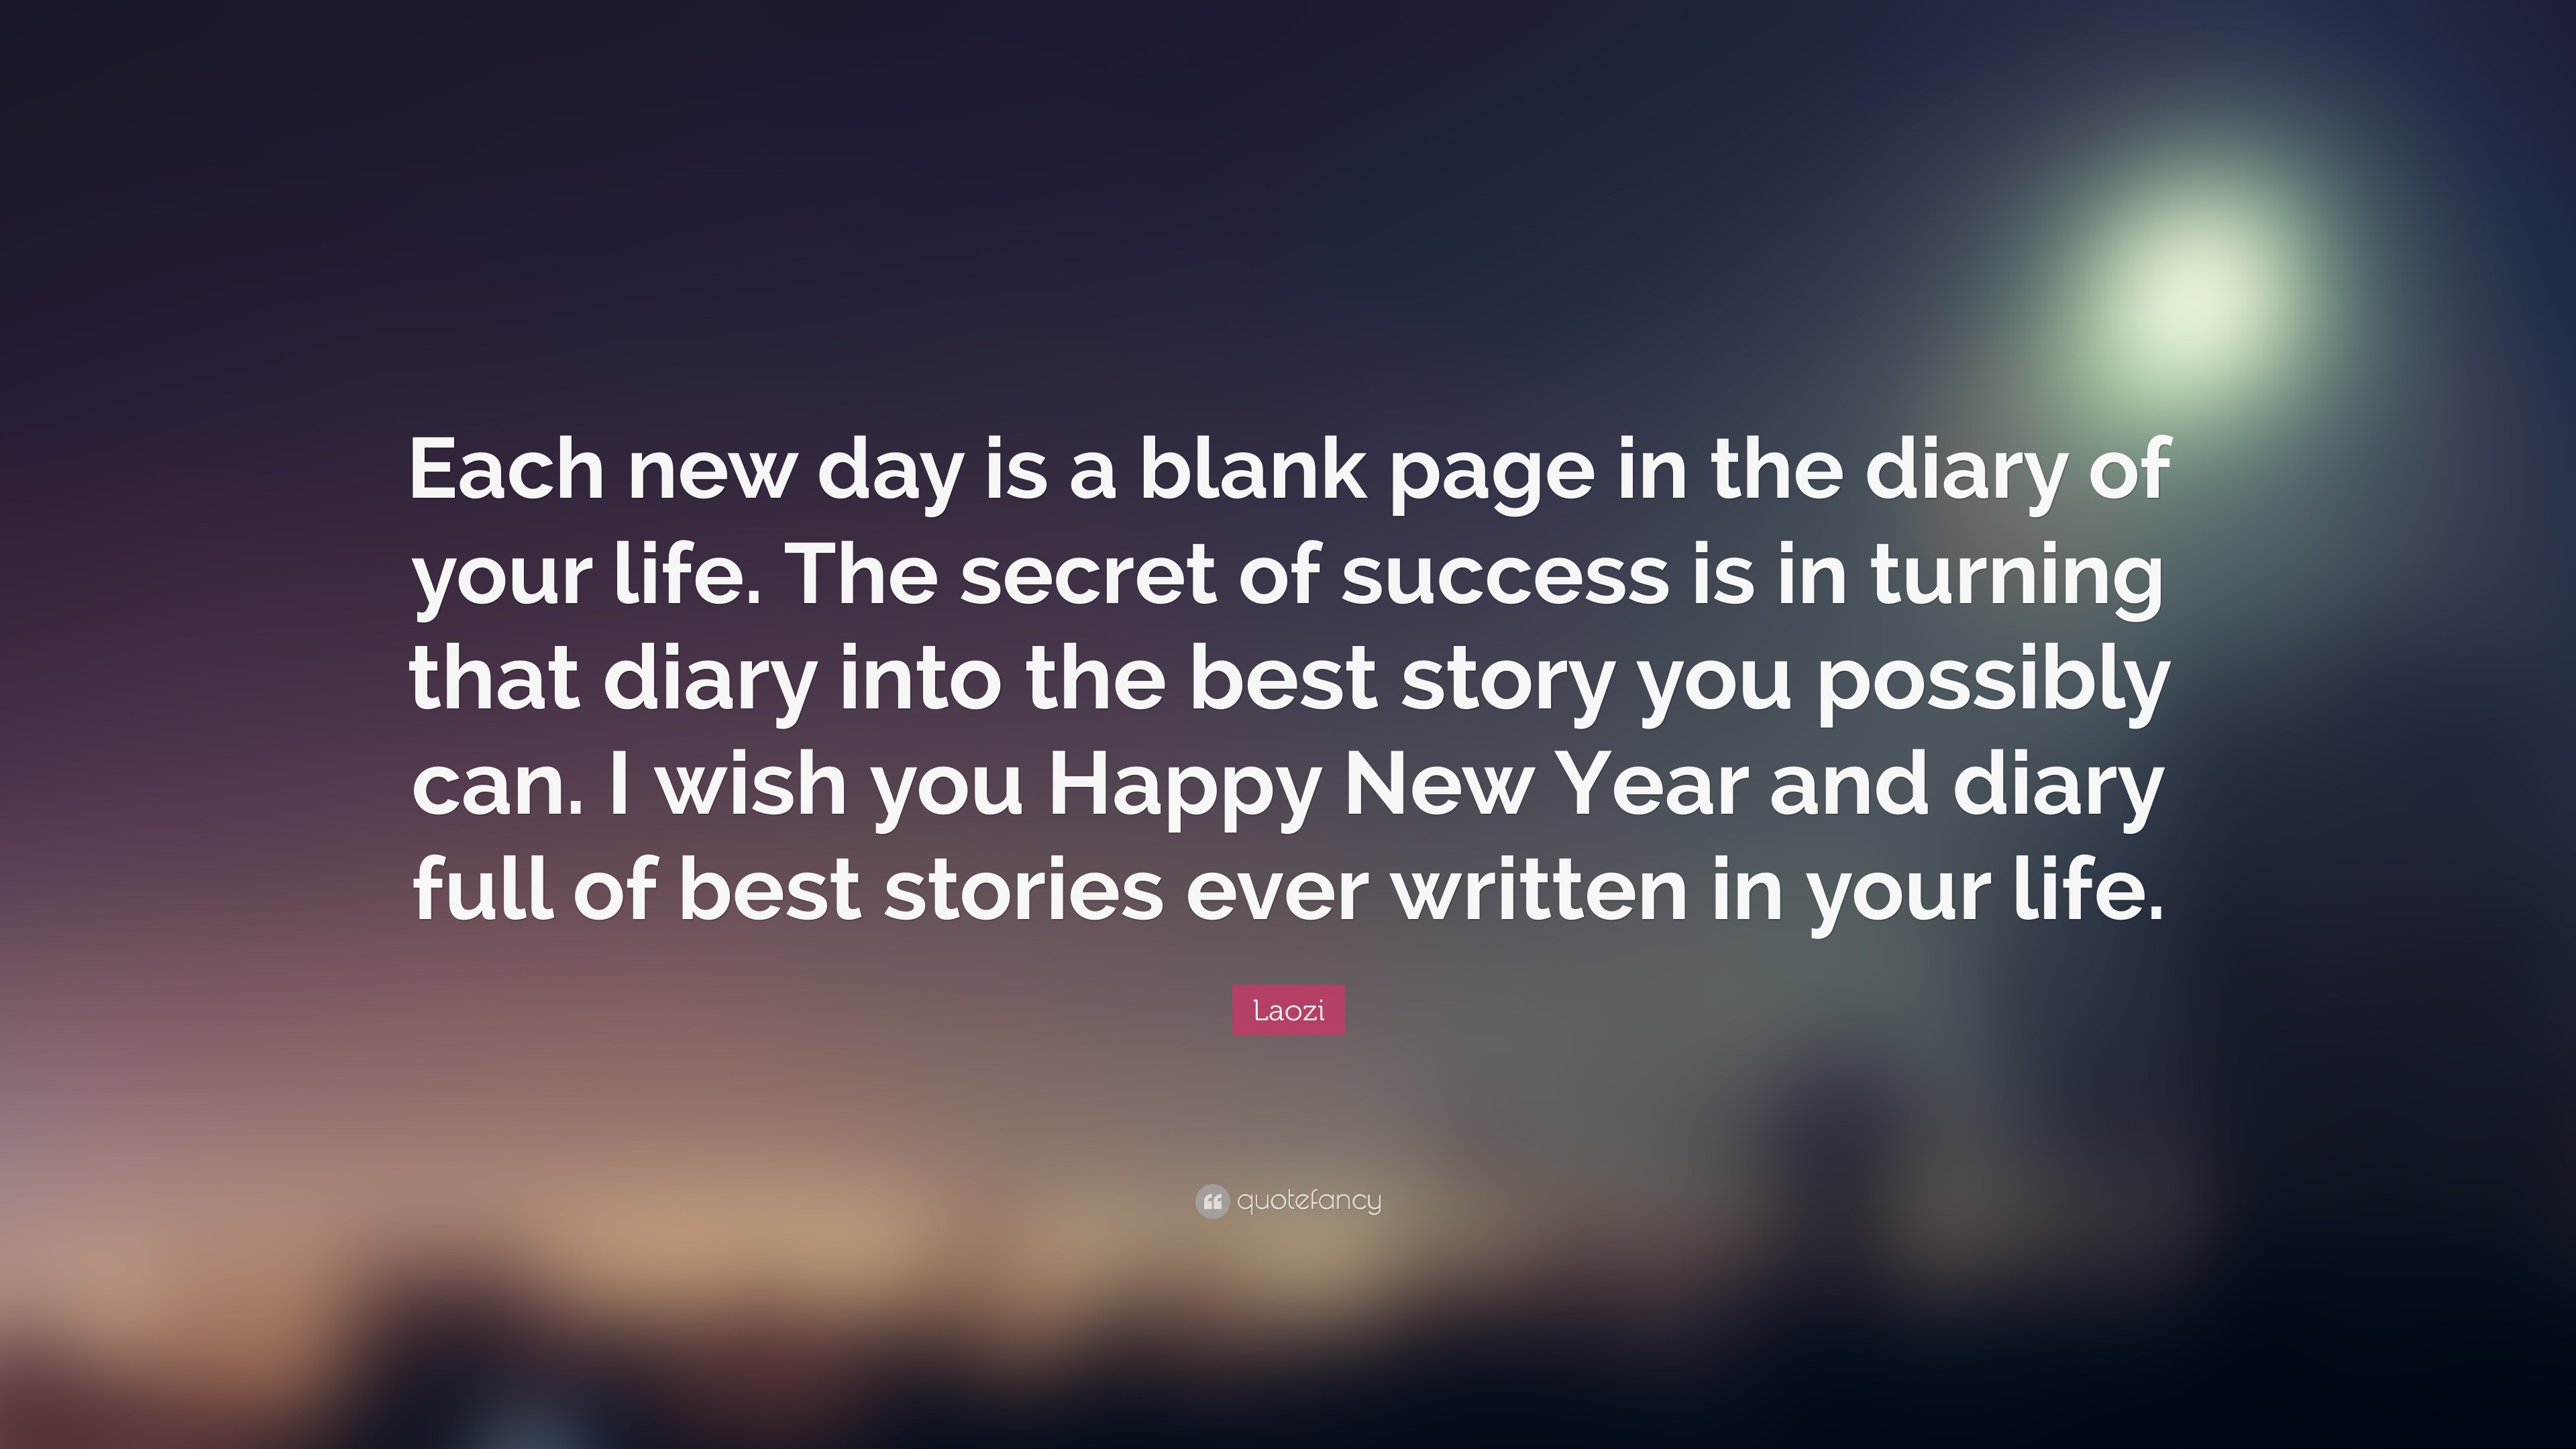 Laozi Quote: “Each New Day Is A Blank Page In The Diary Of Your Life. The Secret Of Success Is In Turning That Diary Into The Best Sto...”